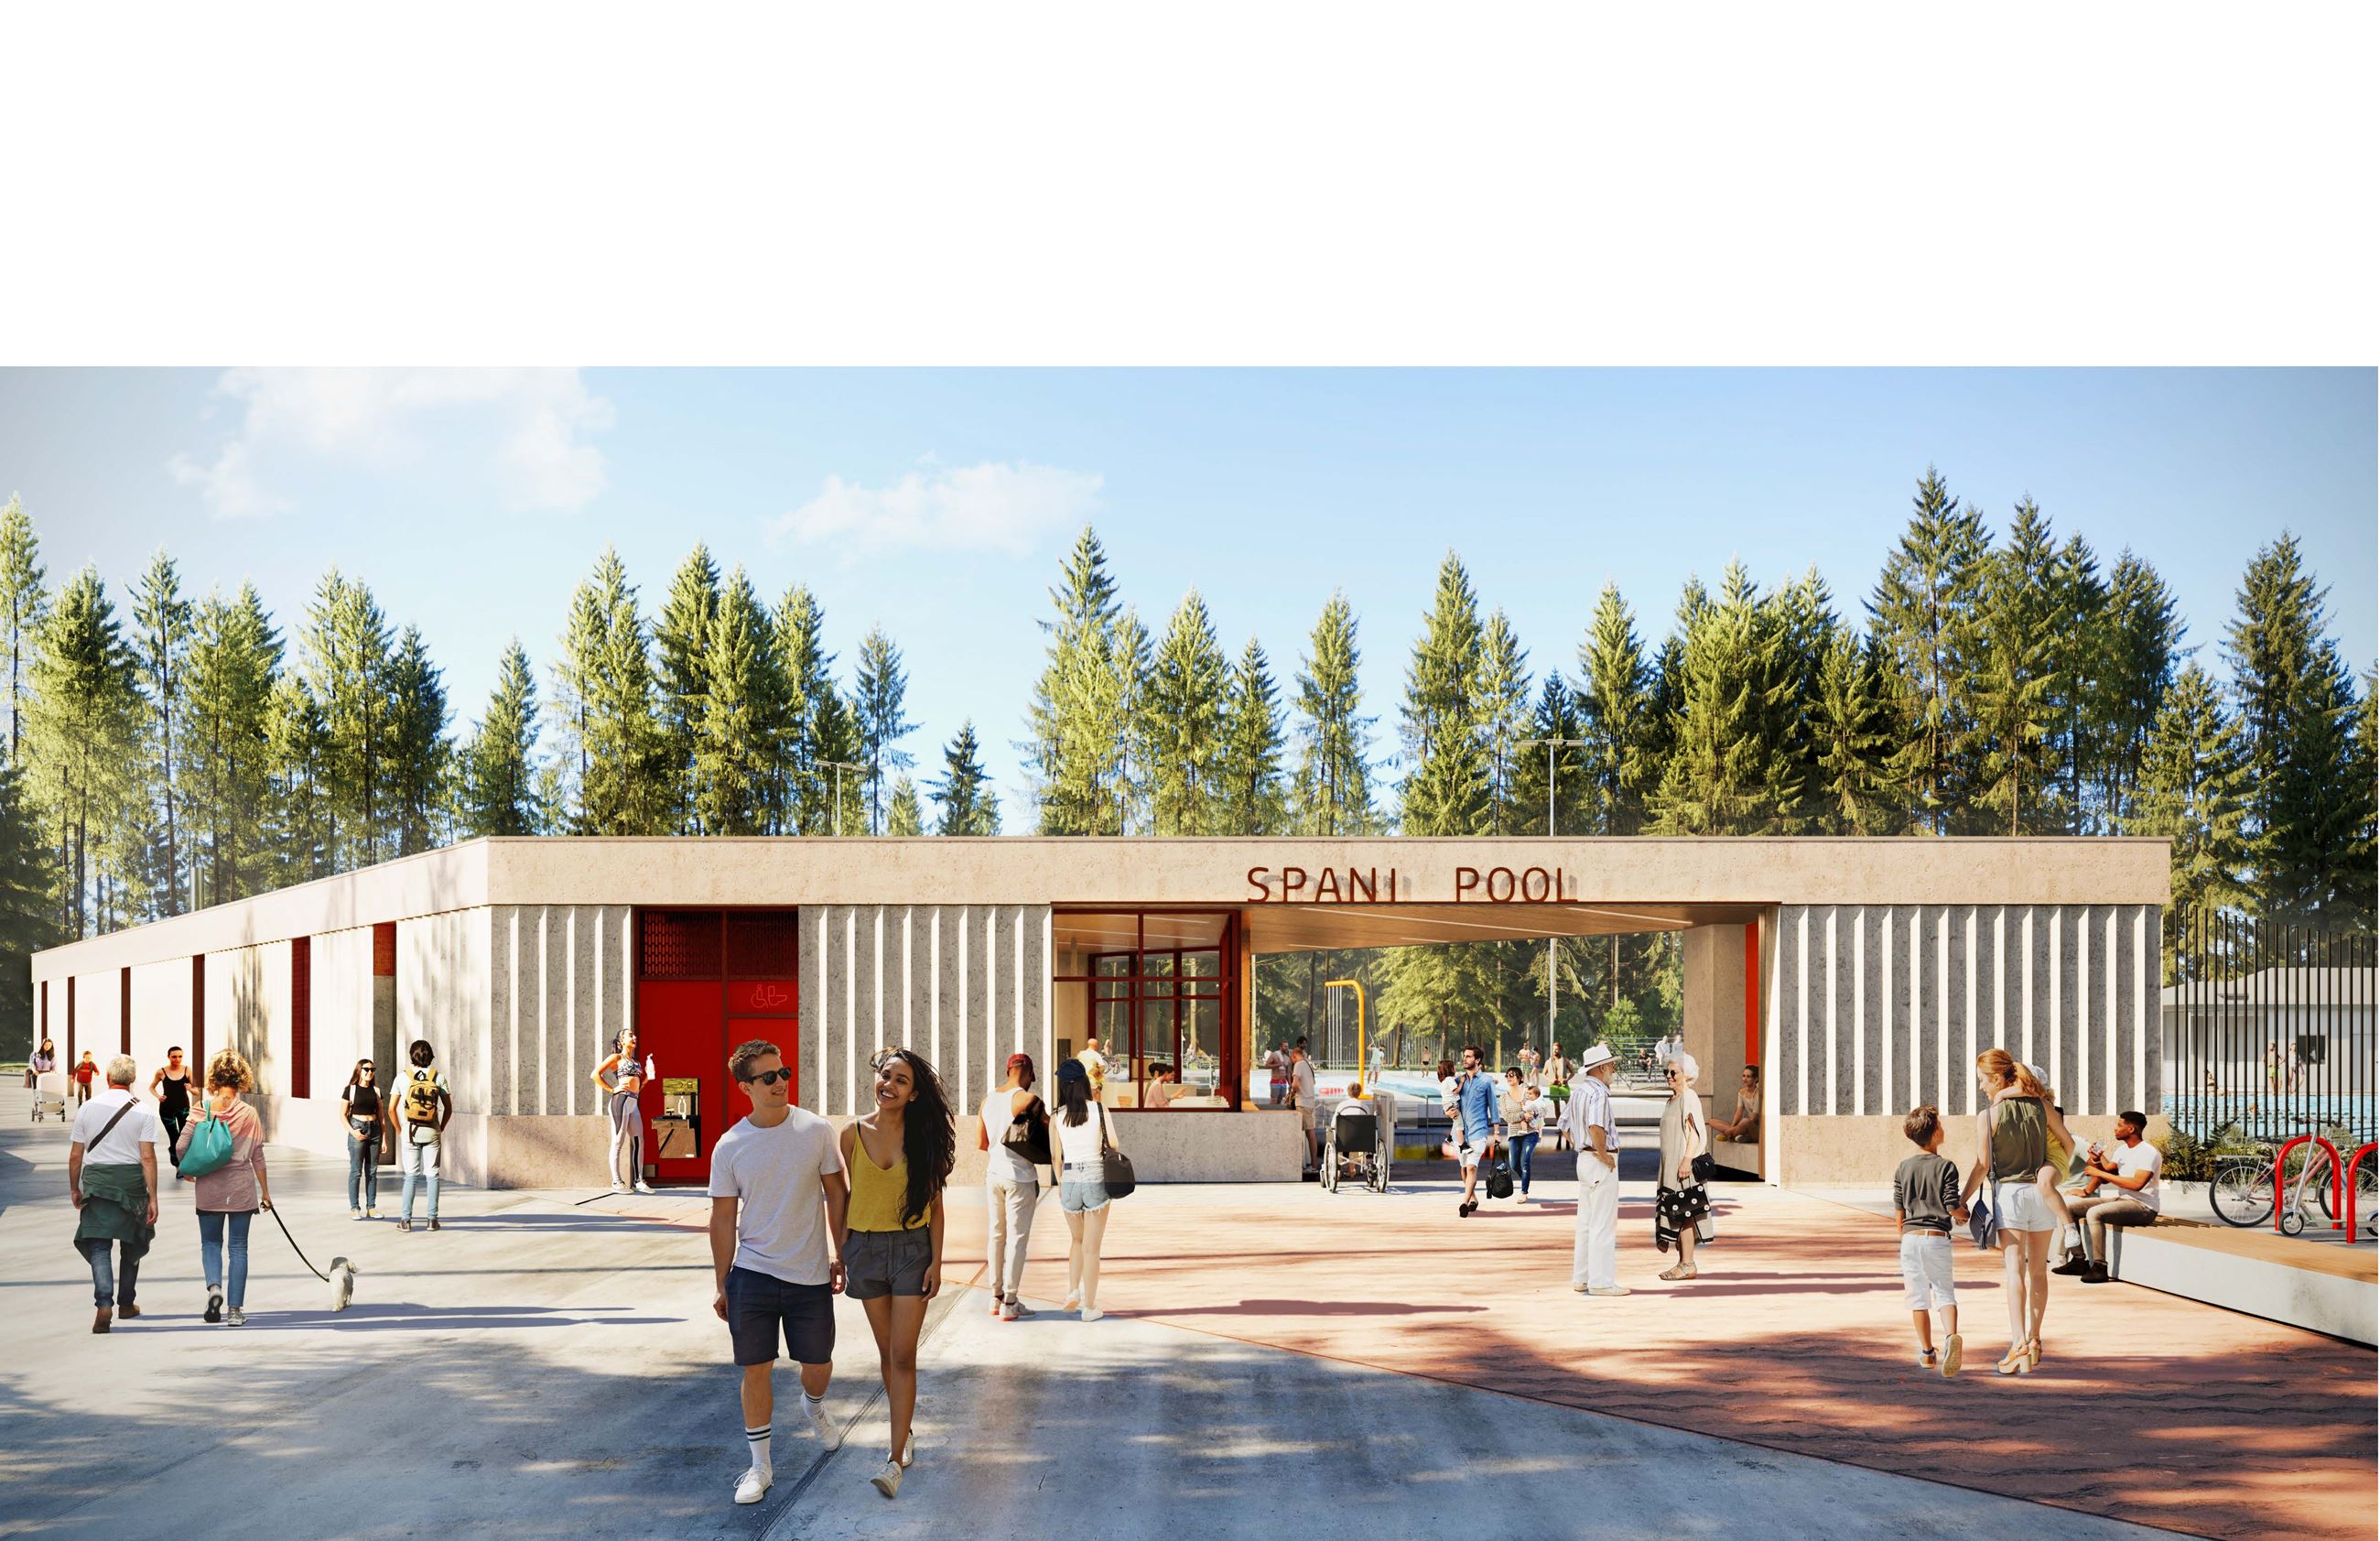 A rendering of the exterior of the new Spani Pool shows a modern facility with people around